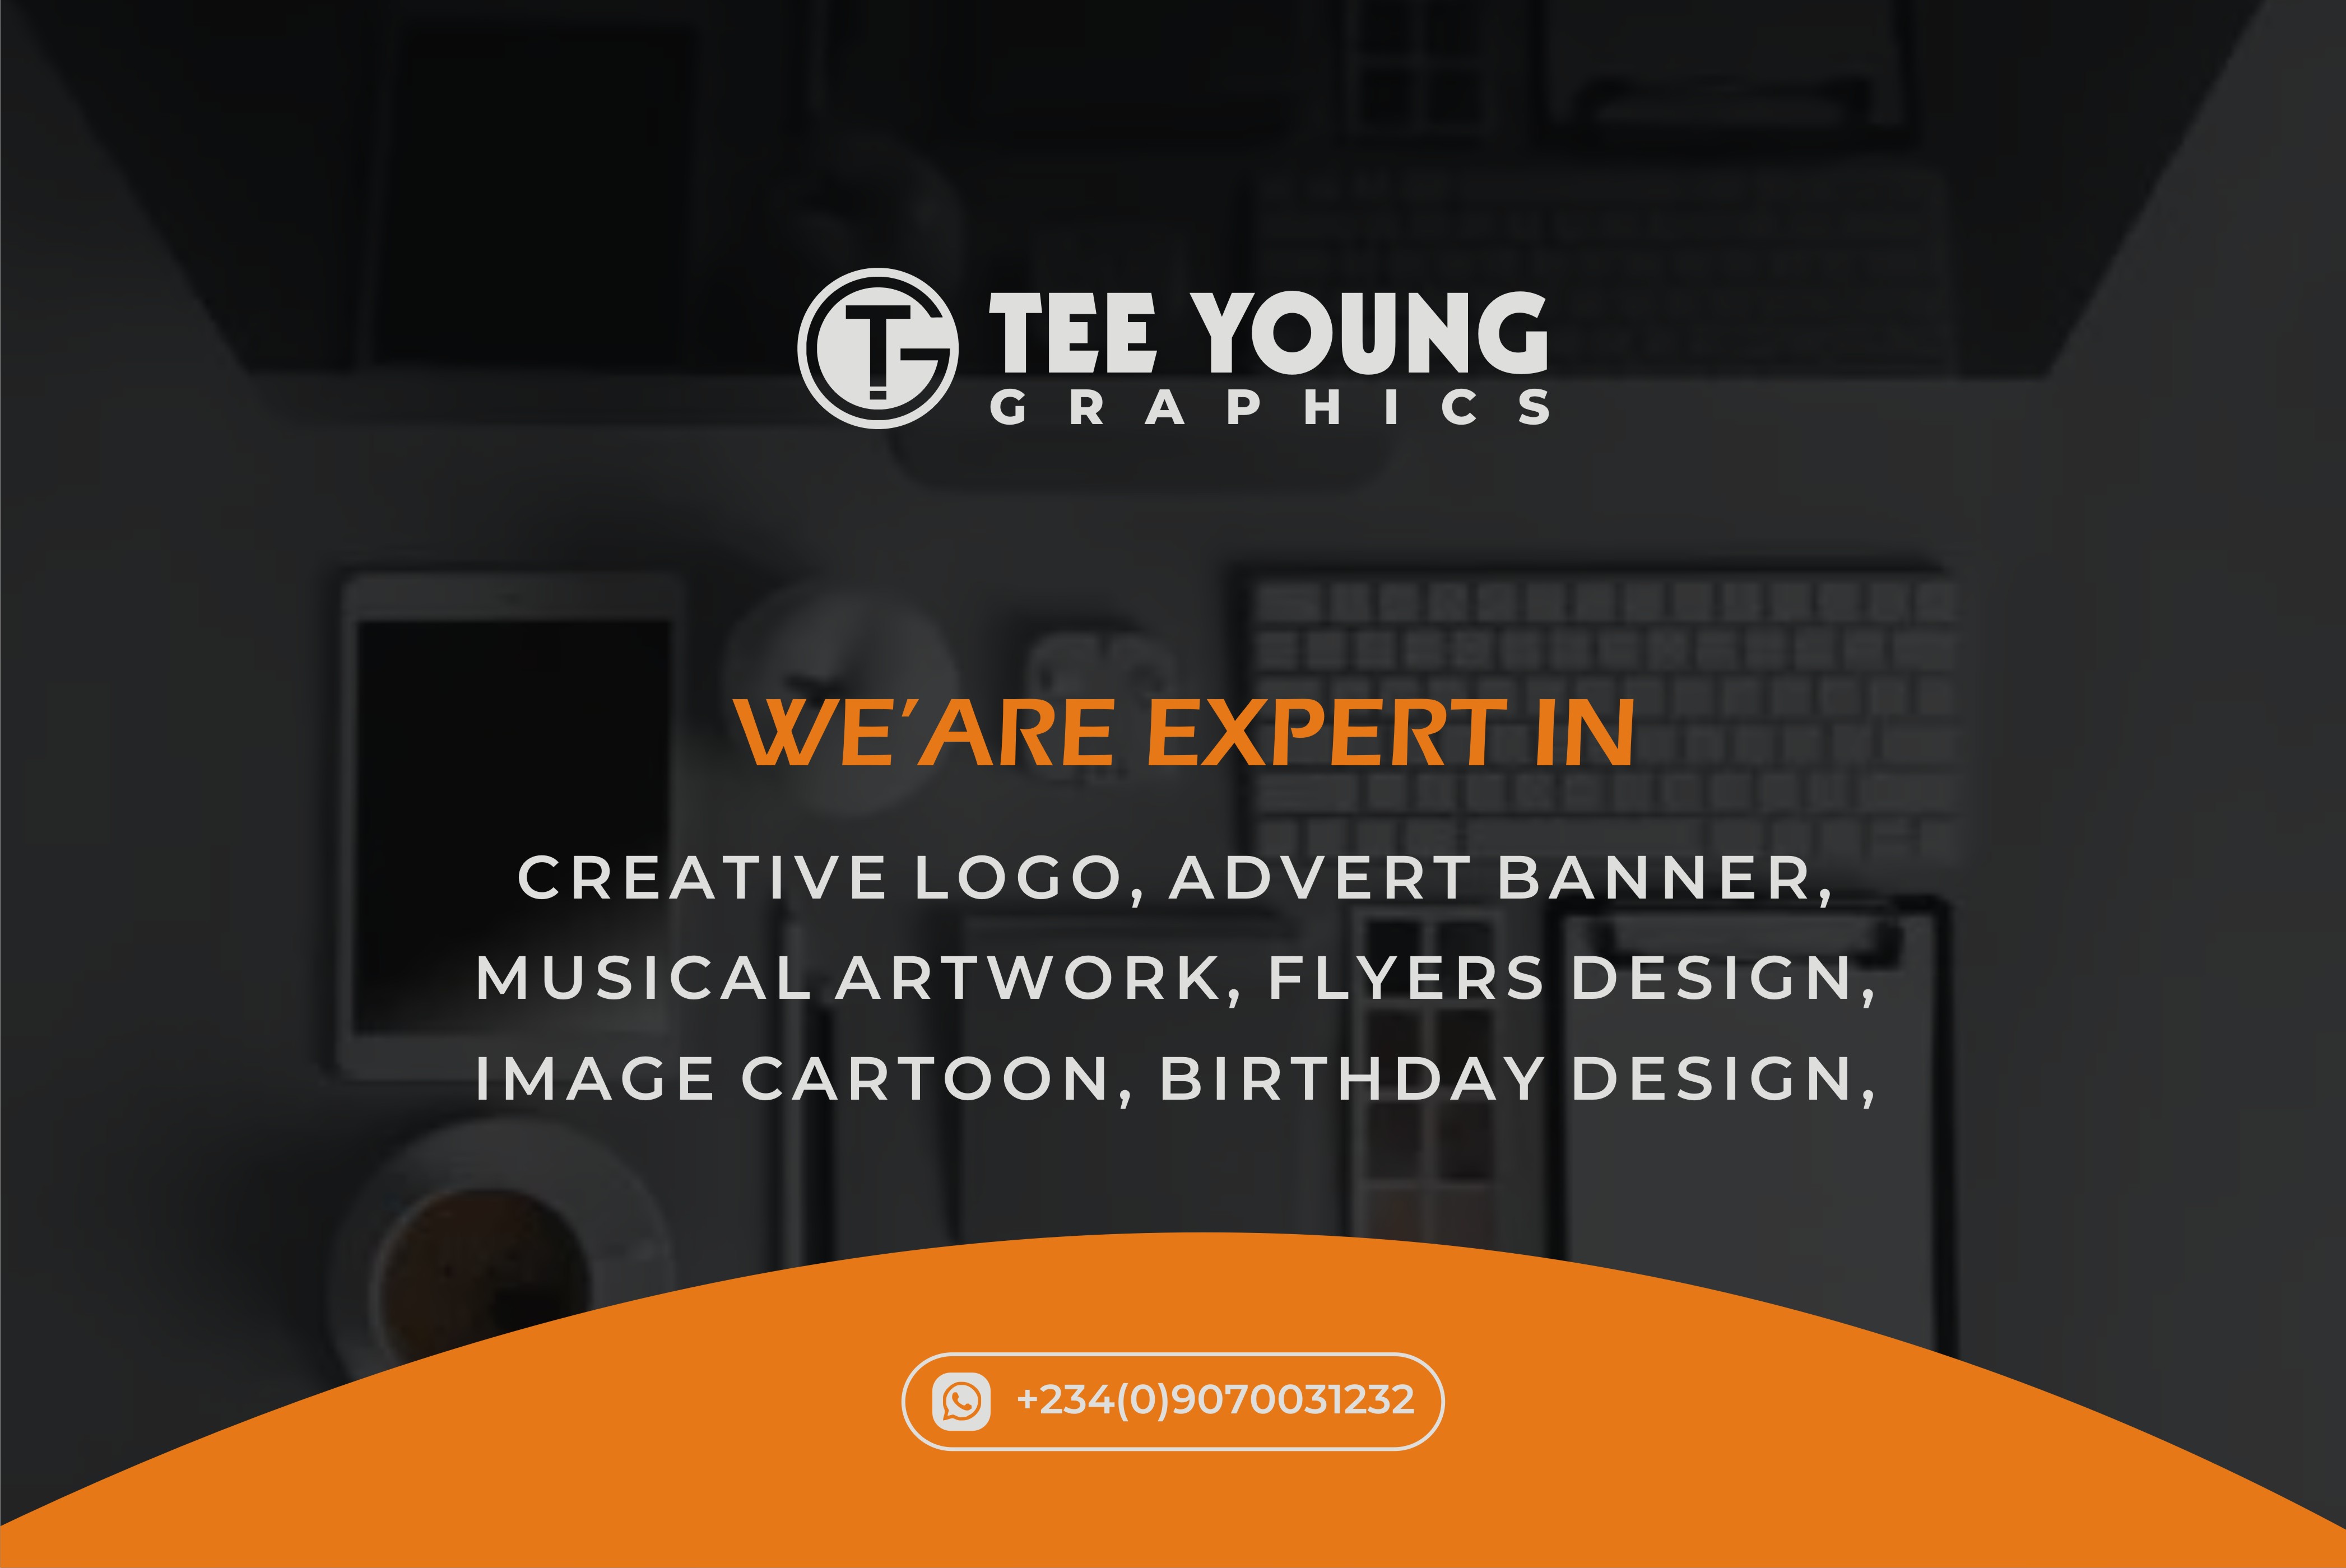 Tee Young Graphics provider